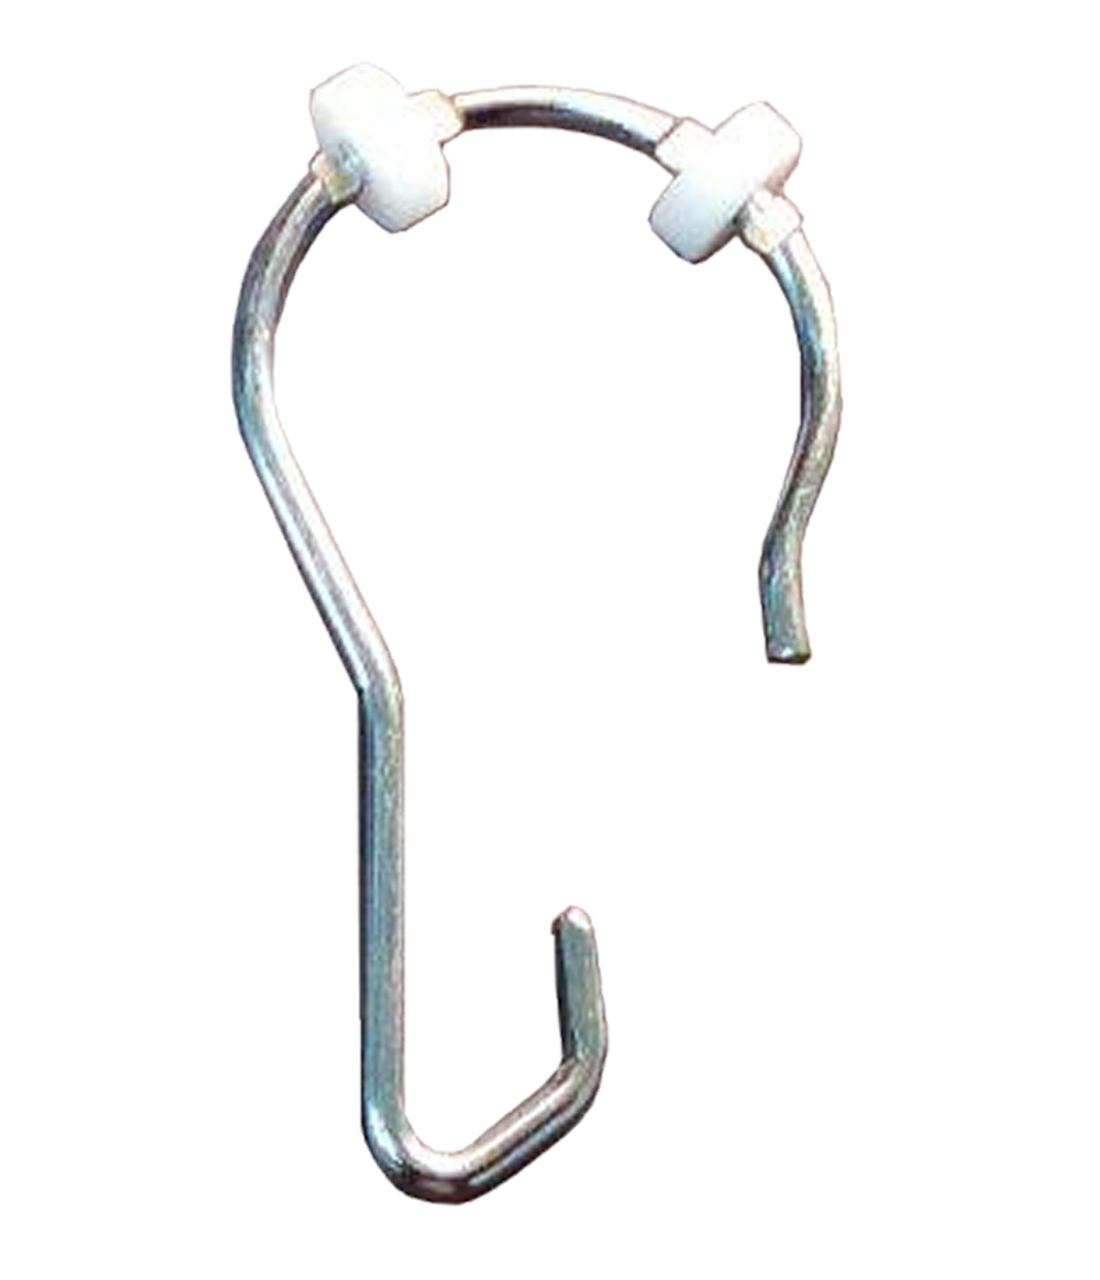 Chrome Plated Curtain Hook with Nylon Rollers - (Model #: 100chnr)-image